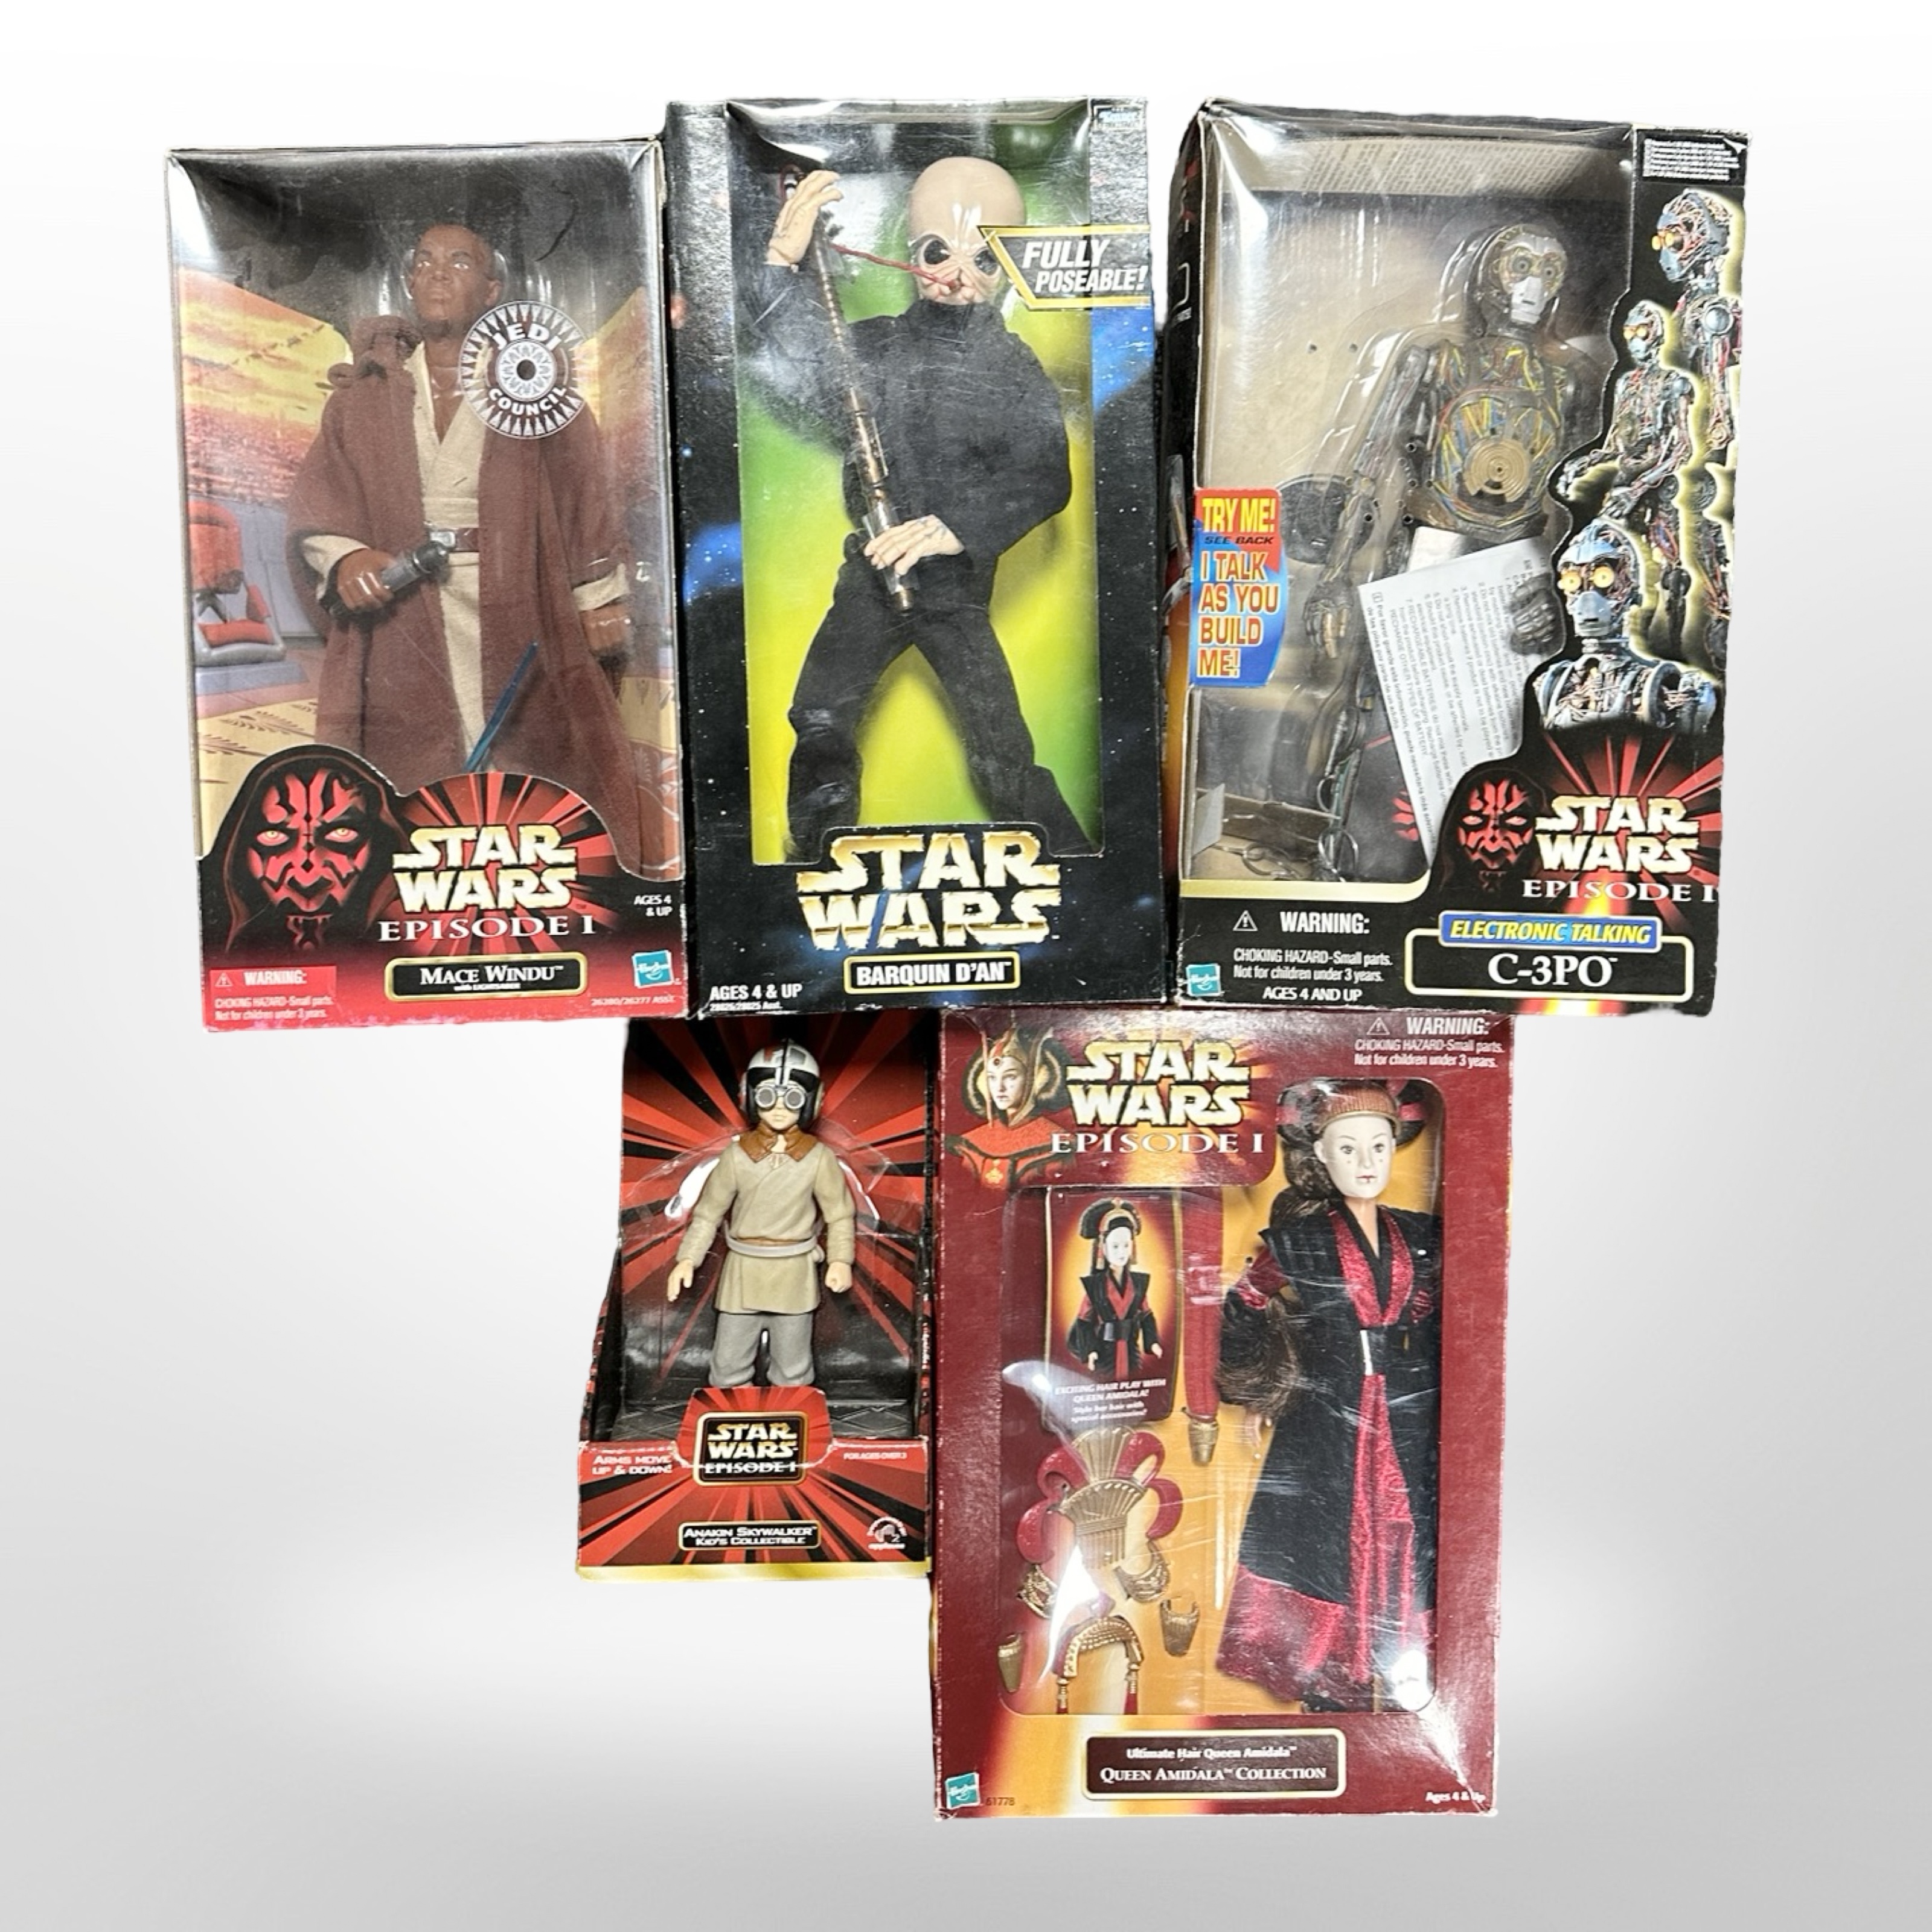 Four Hasbro Star Wars Episode I figurines, plus a further Action Collection figure, boxed.